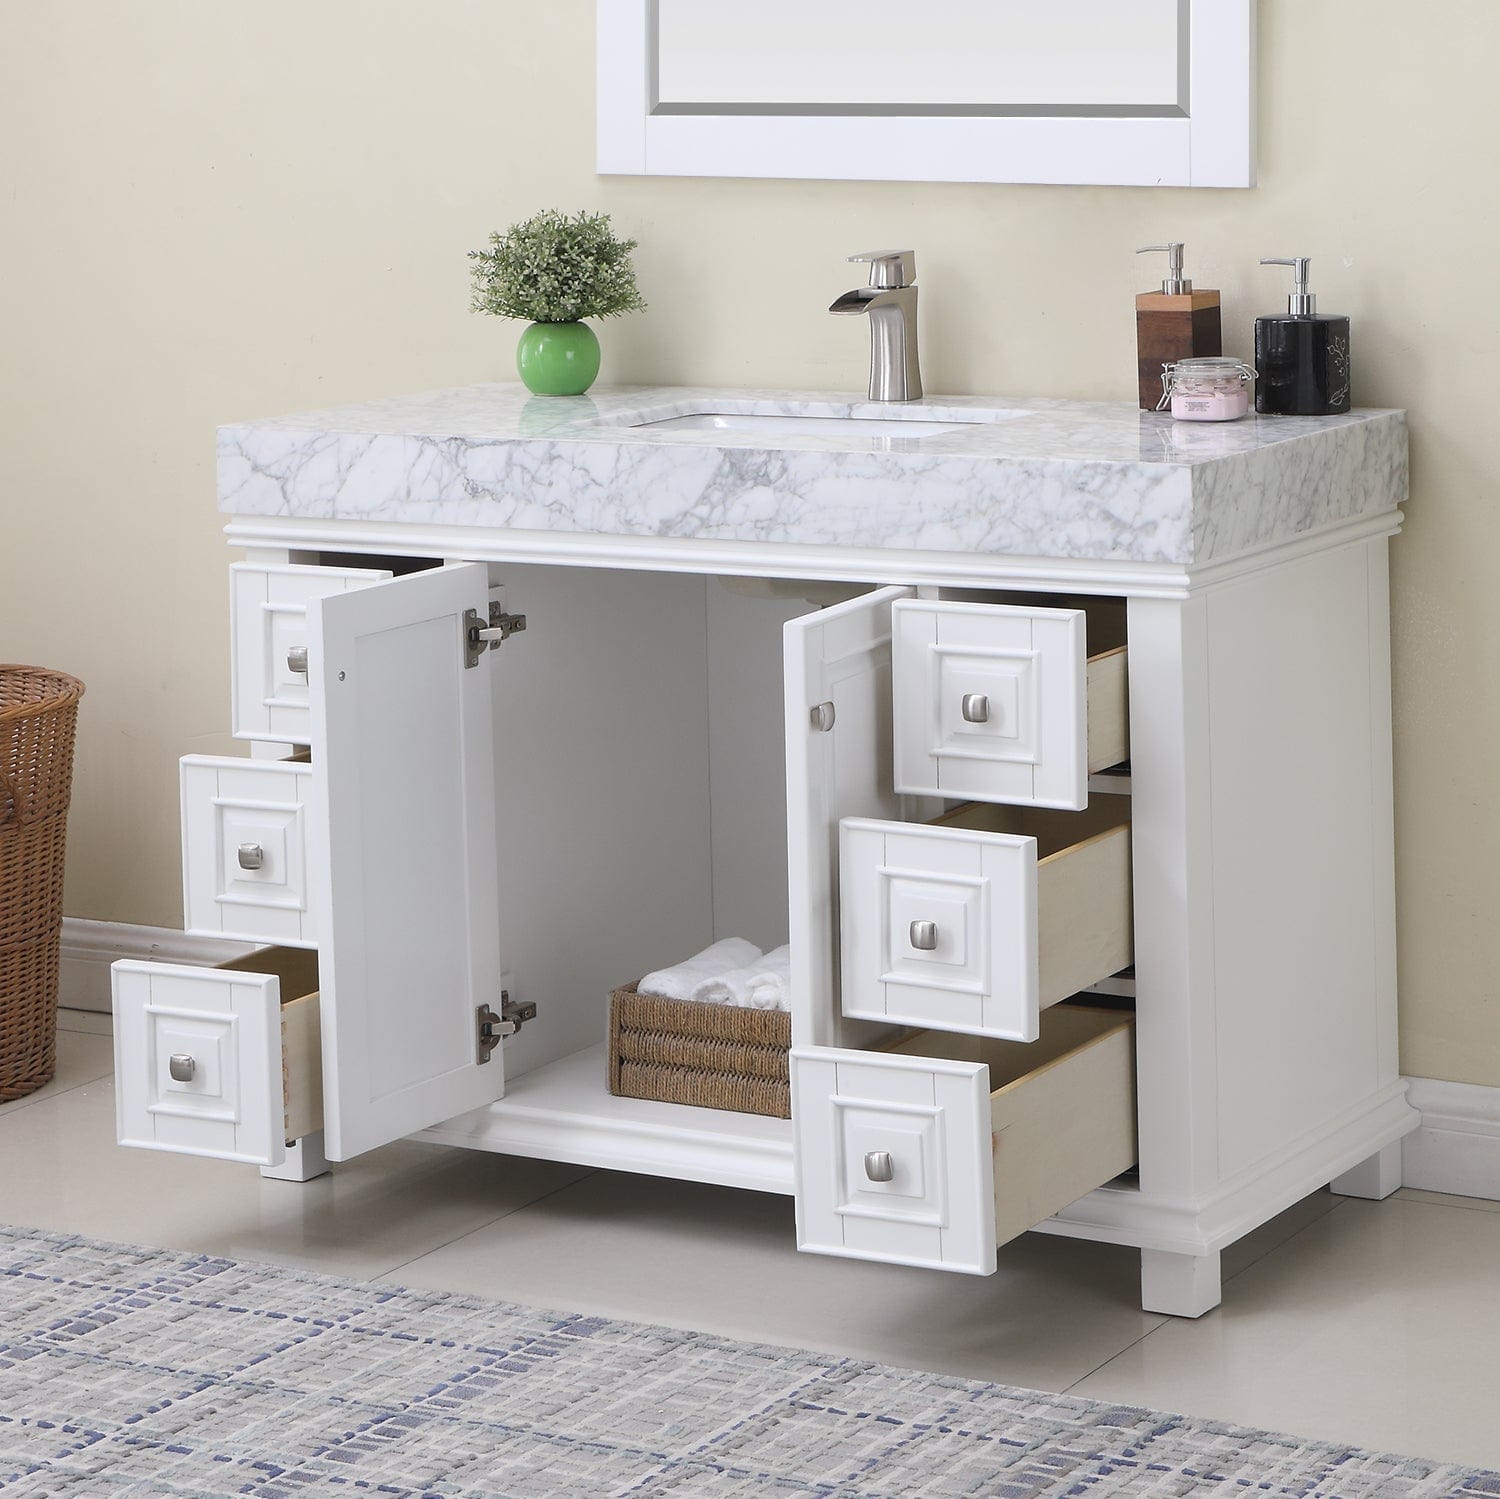 Altair Jardin 48" Single Bathroom Vanity Set in White and Carrara White Marble Countertop with Mirror 539048-WH-CA - Molaix631112971010Vanity539048-WH-CA